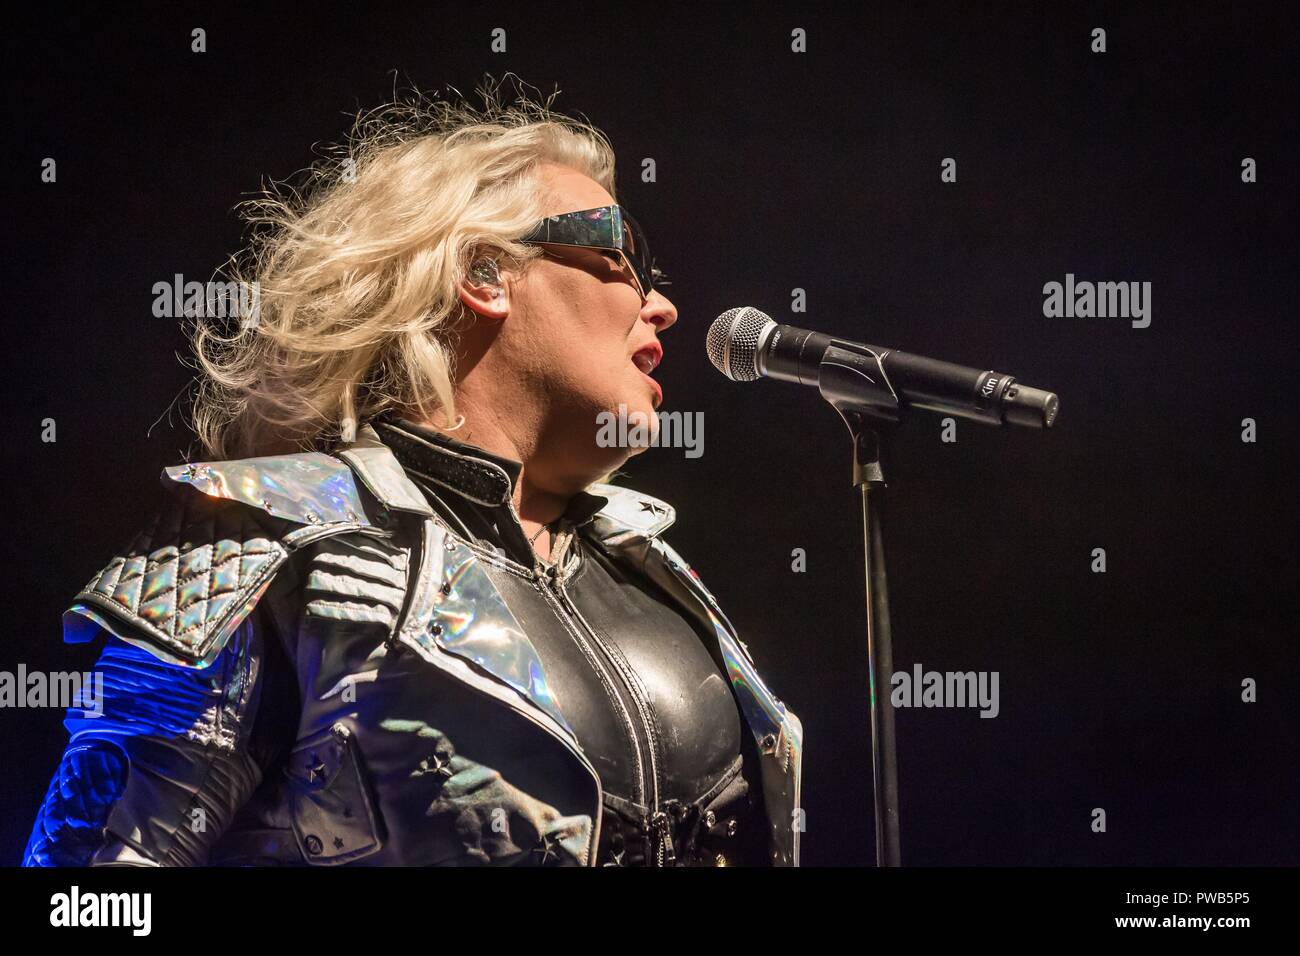 Berlin, Deutschland. 13th Oct, 2018. 13.10.2018, The British singer Kim Wilde live with a futuristic sunglasses on the Here Come The Aliens Tour 2018 in the Columbiahalle in Berlin. | 13.10.2018, British singer Kim Wilde performing live with futuristic sunglasses on her The Aliens Tour 2018 at the Columbiahall in Berlin, Germany. | usage worldwide Credit: dpa/Alamy Live News Stock Photo